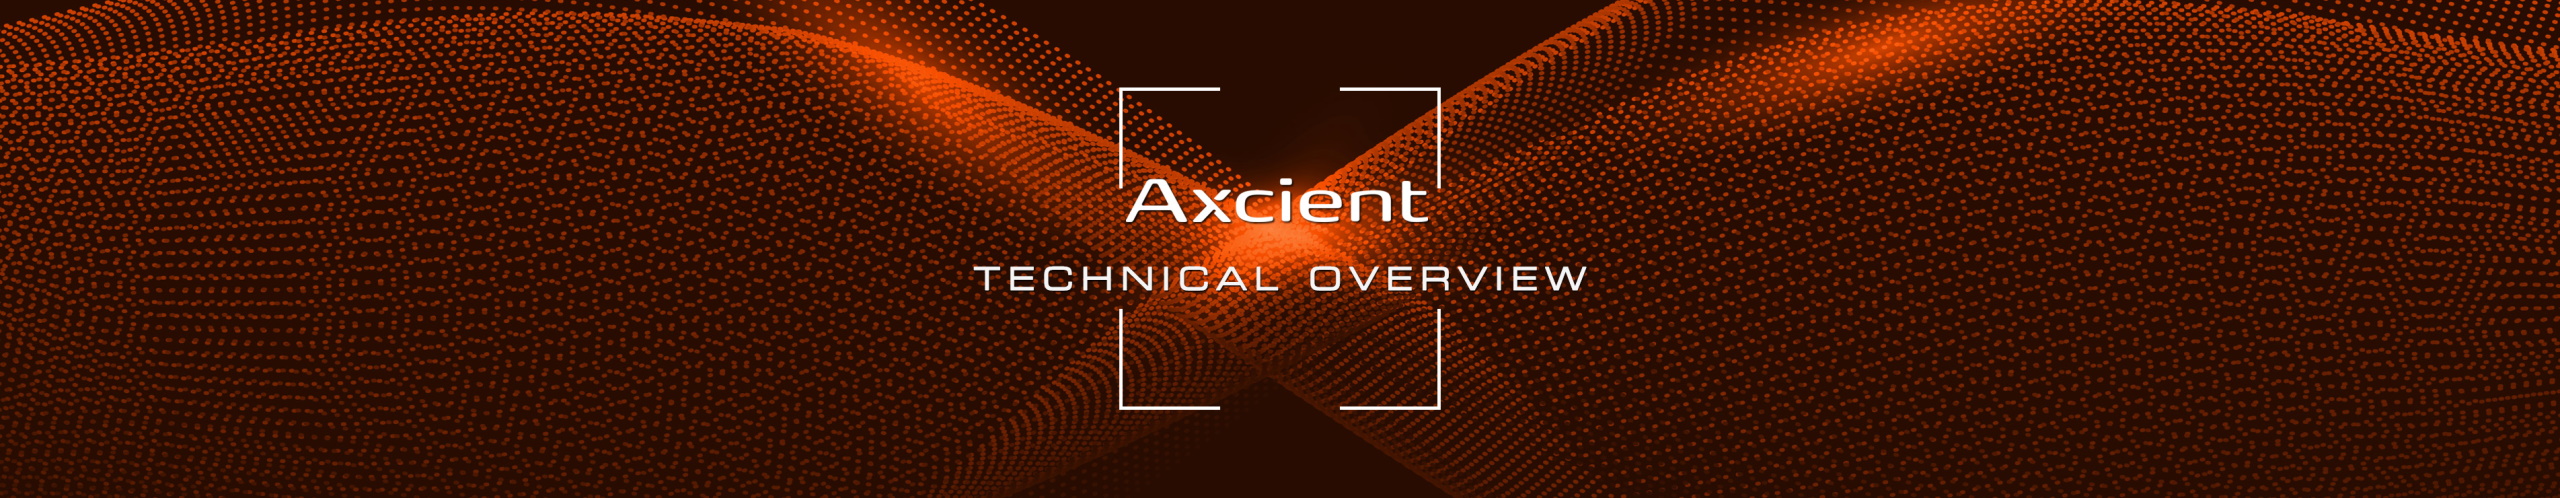 Axcient Technical Overview